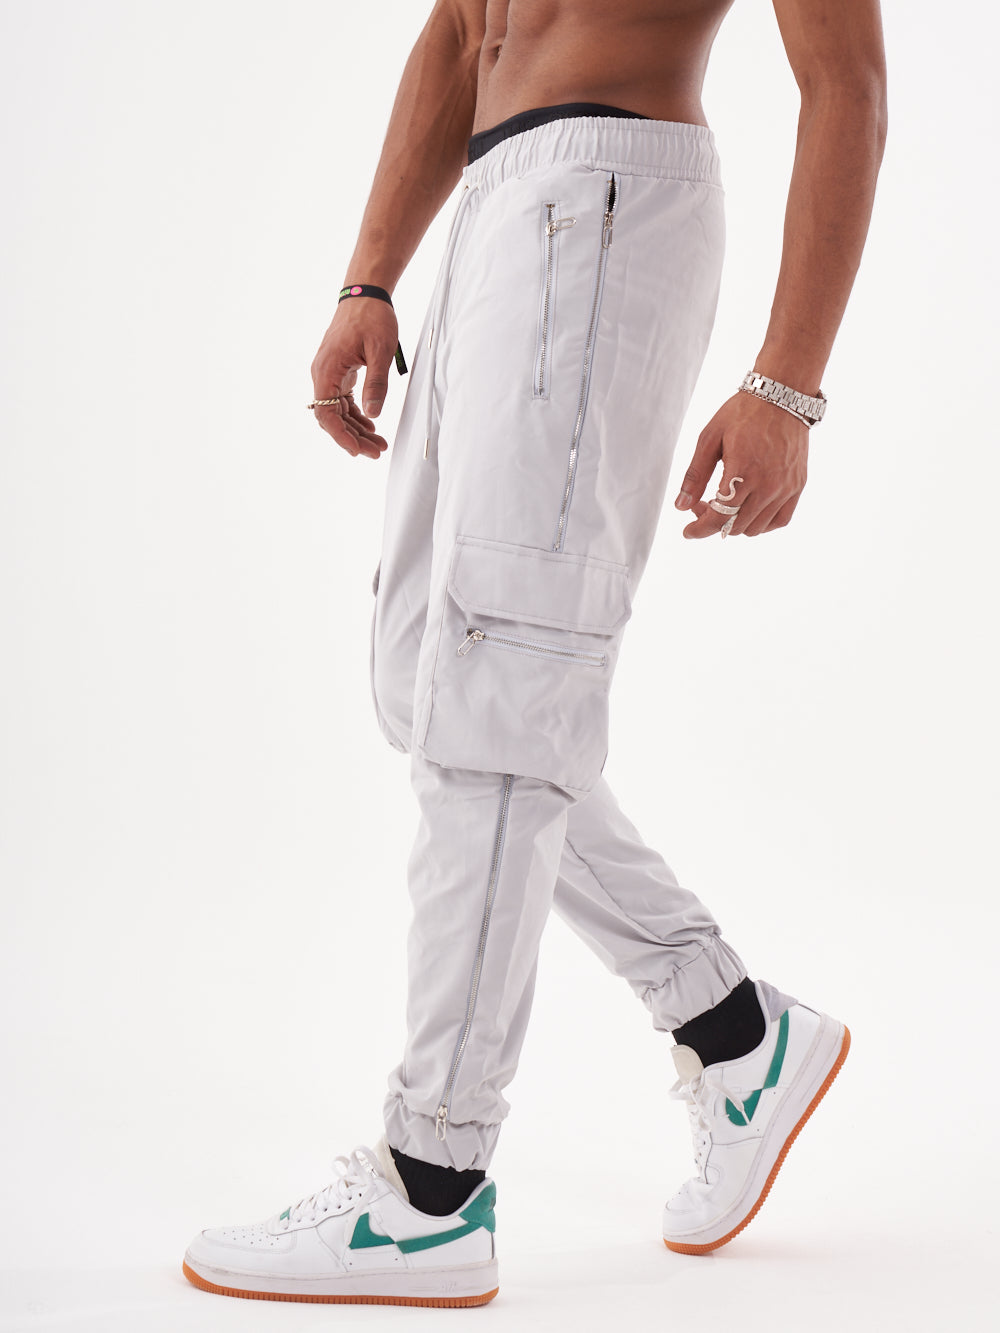 A man in a pair of ANARCHY JOGGERS is posing in front of a white background.